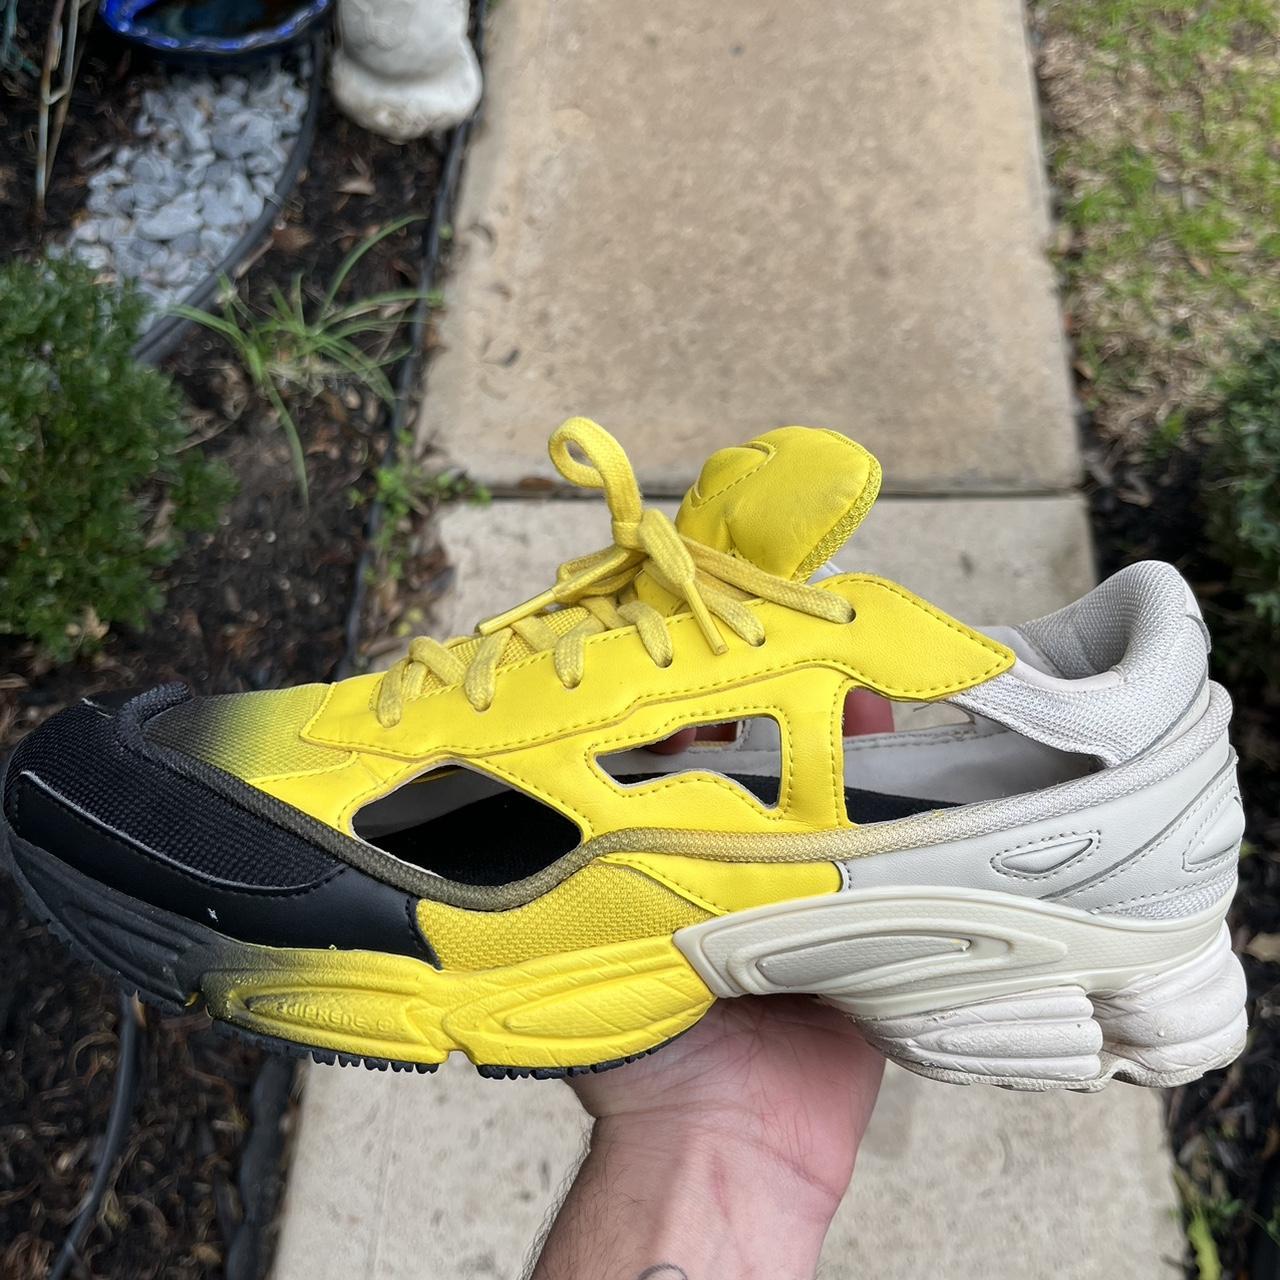 Raf Simons Men's Yellow and Black Trainers (2)